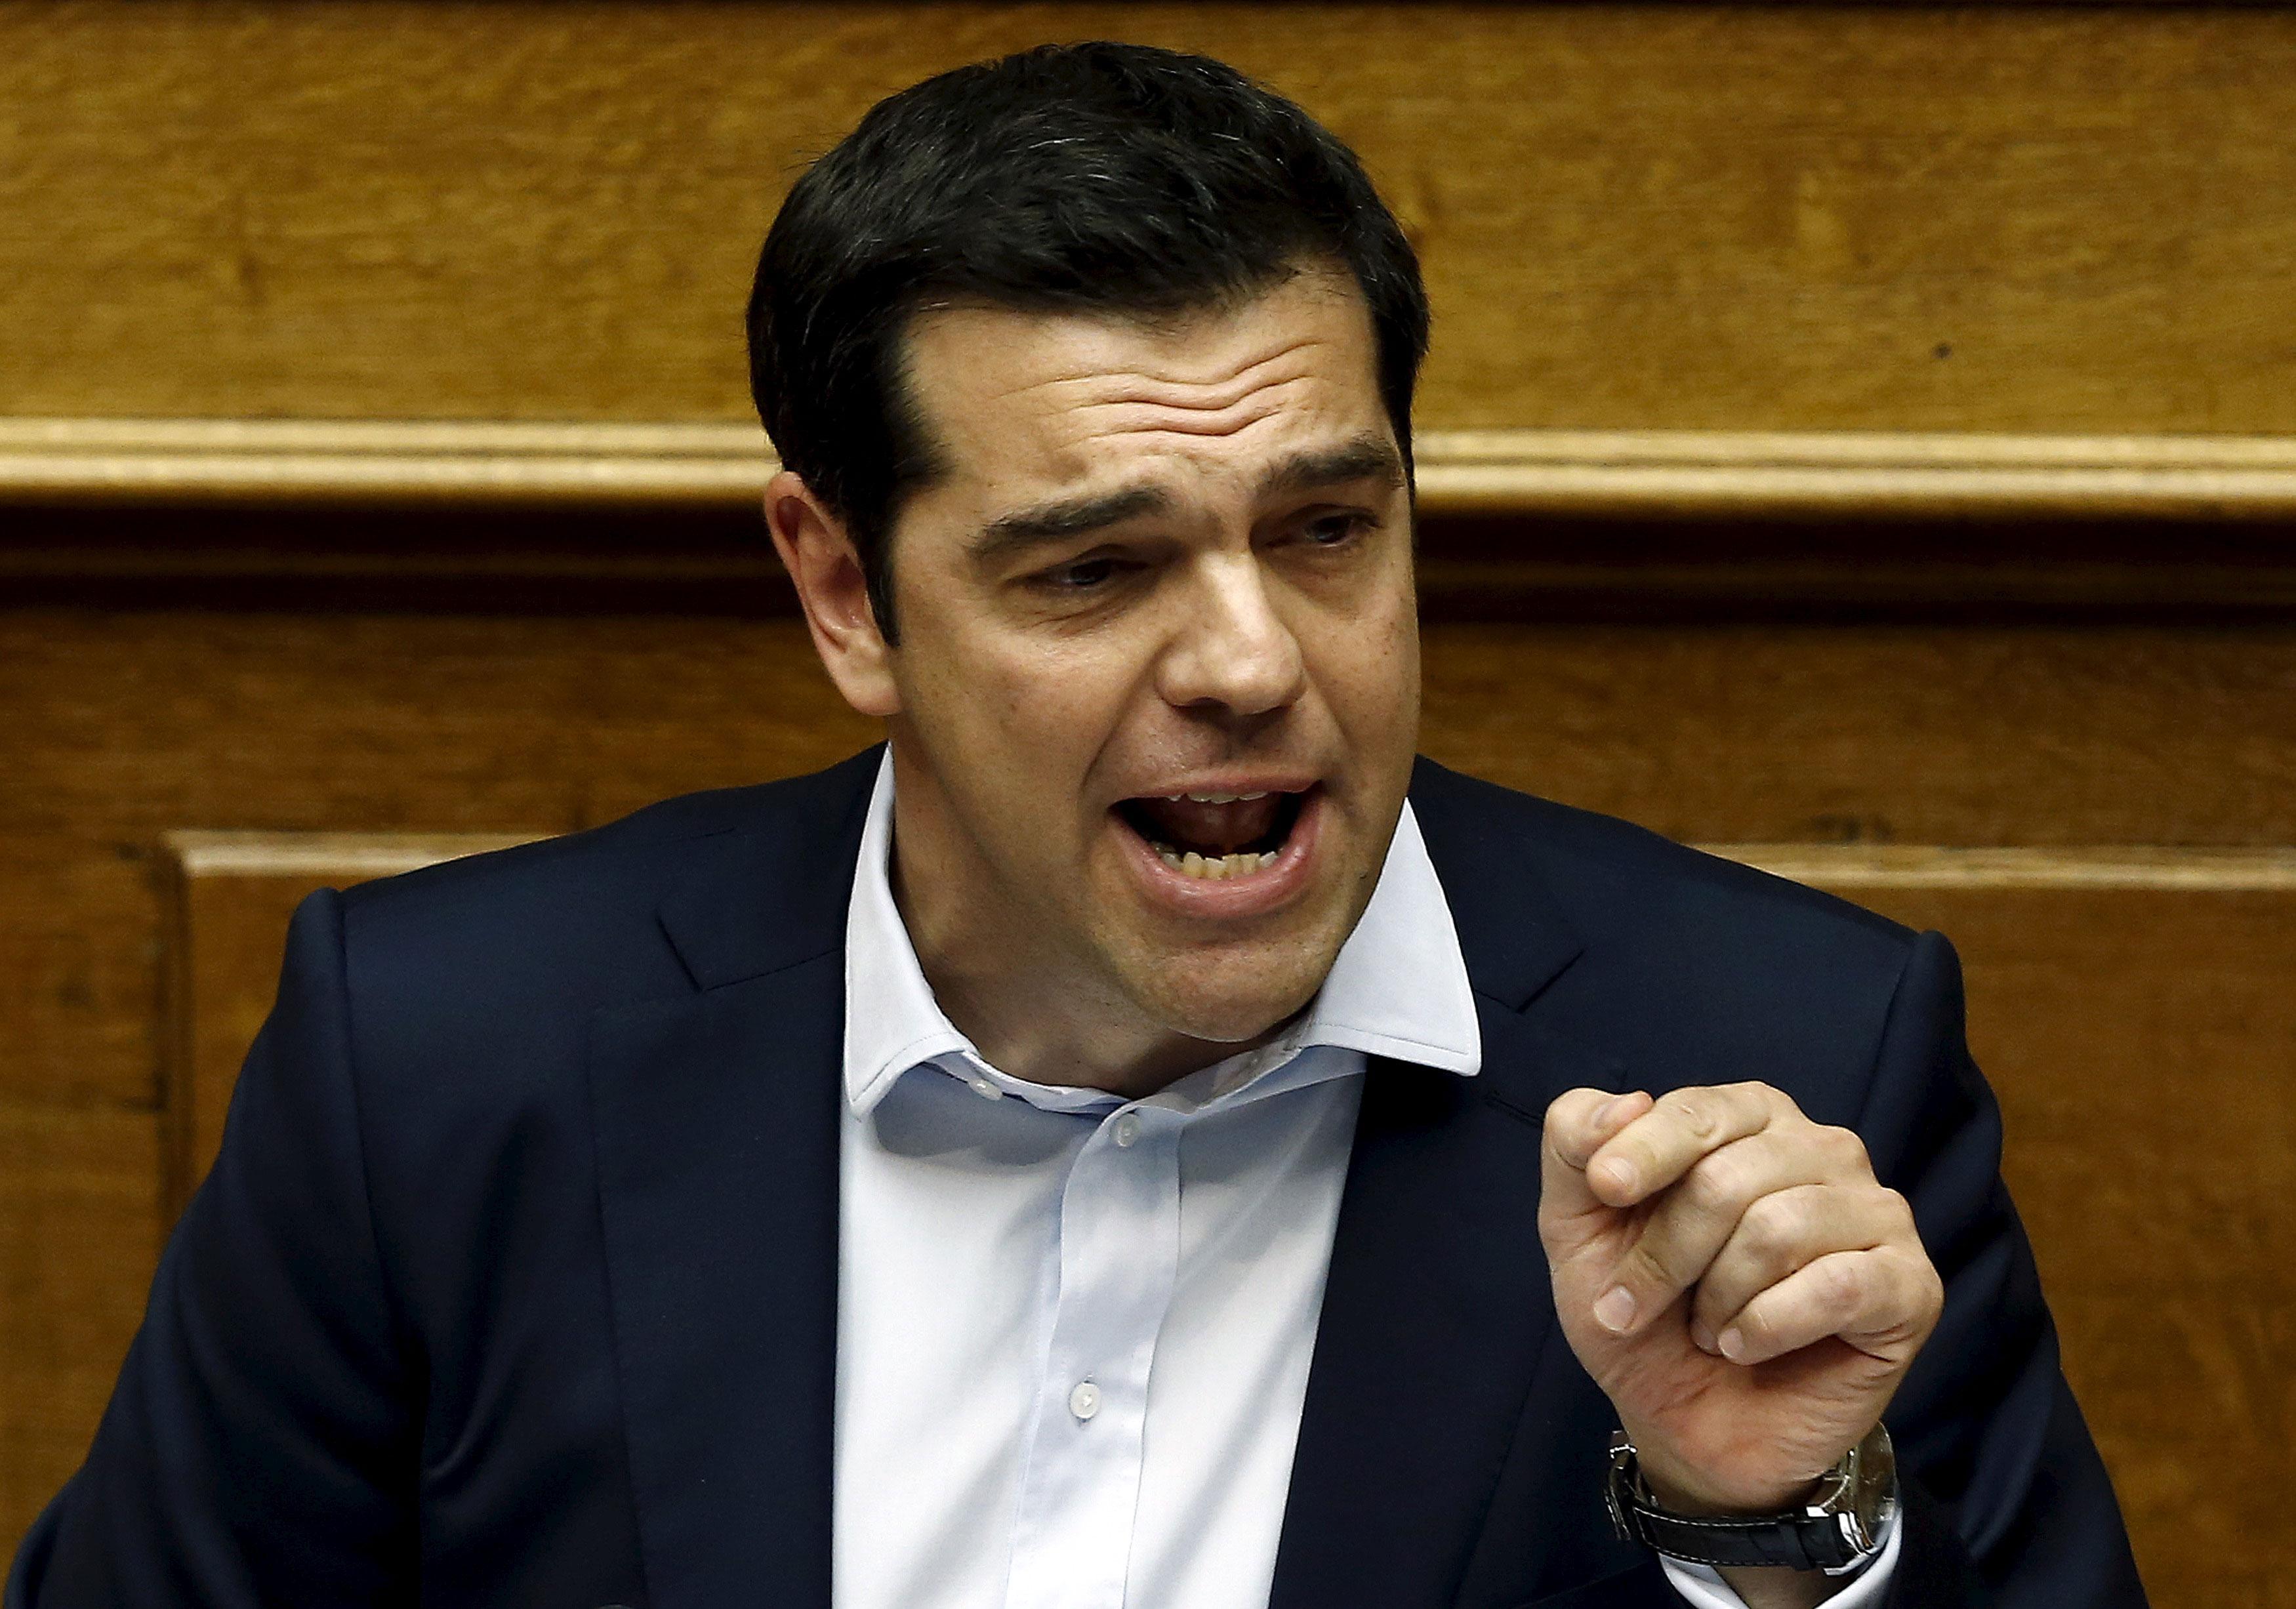 Greece enters uncharted territory after voting ’no’ in referendum on more austerity